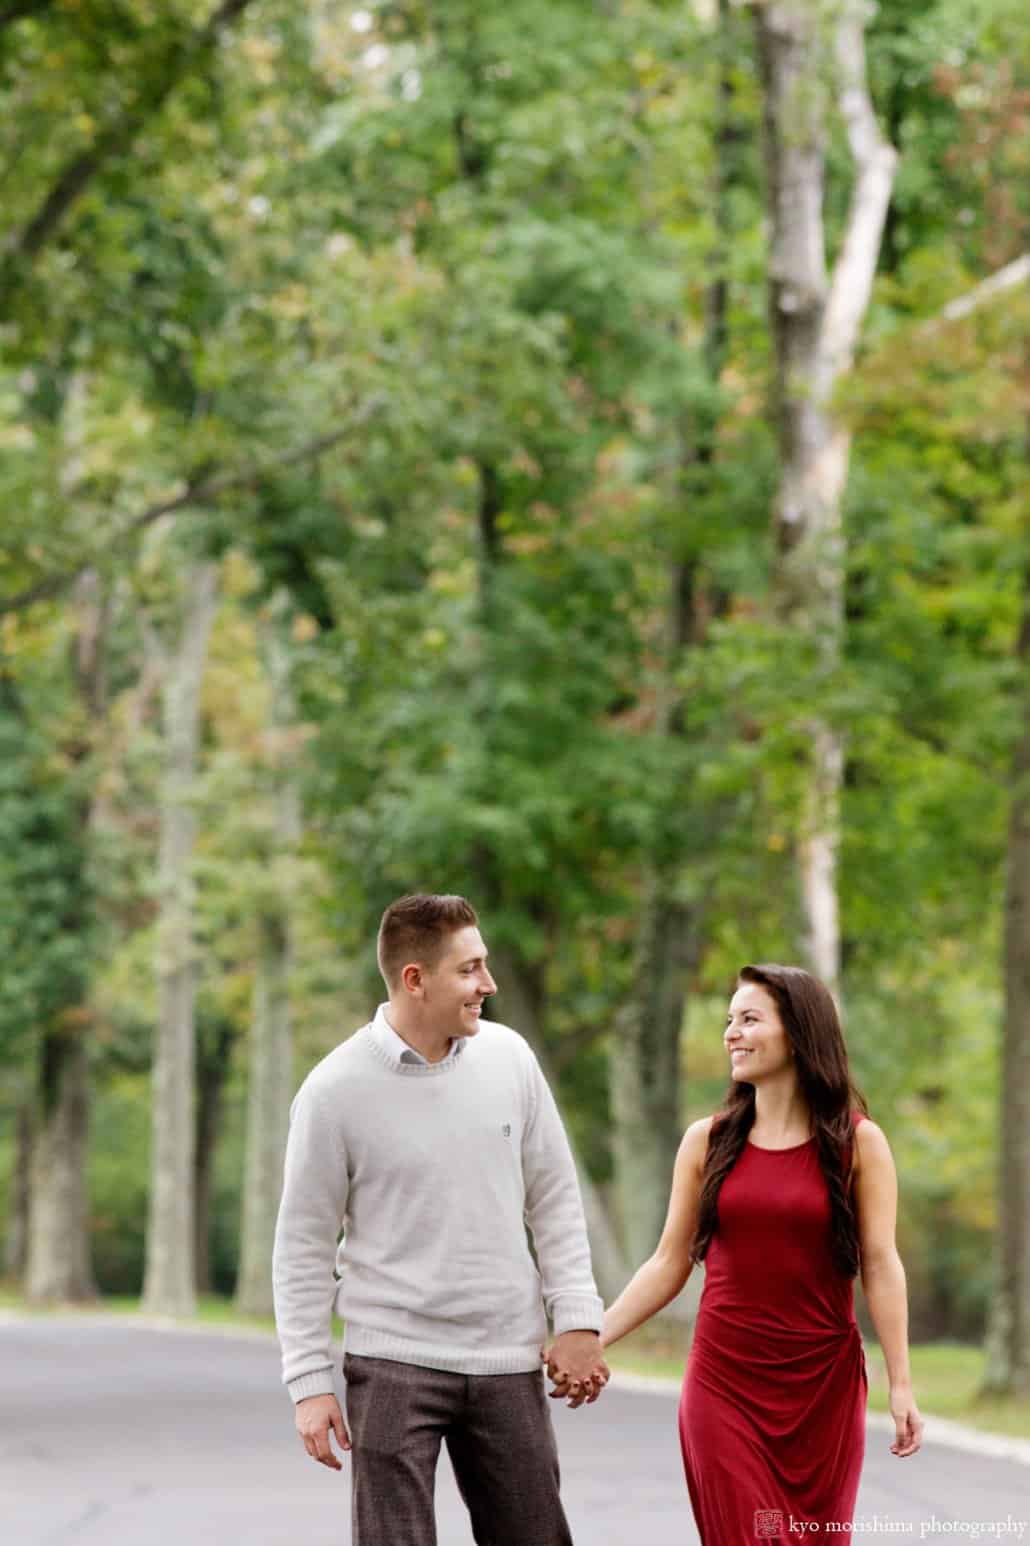 Engagement picture with red dress on the driveway at Jasna Polana, Princeton, photographed by Kyo Morishima